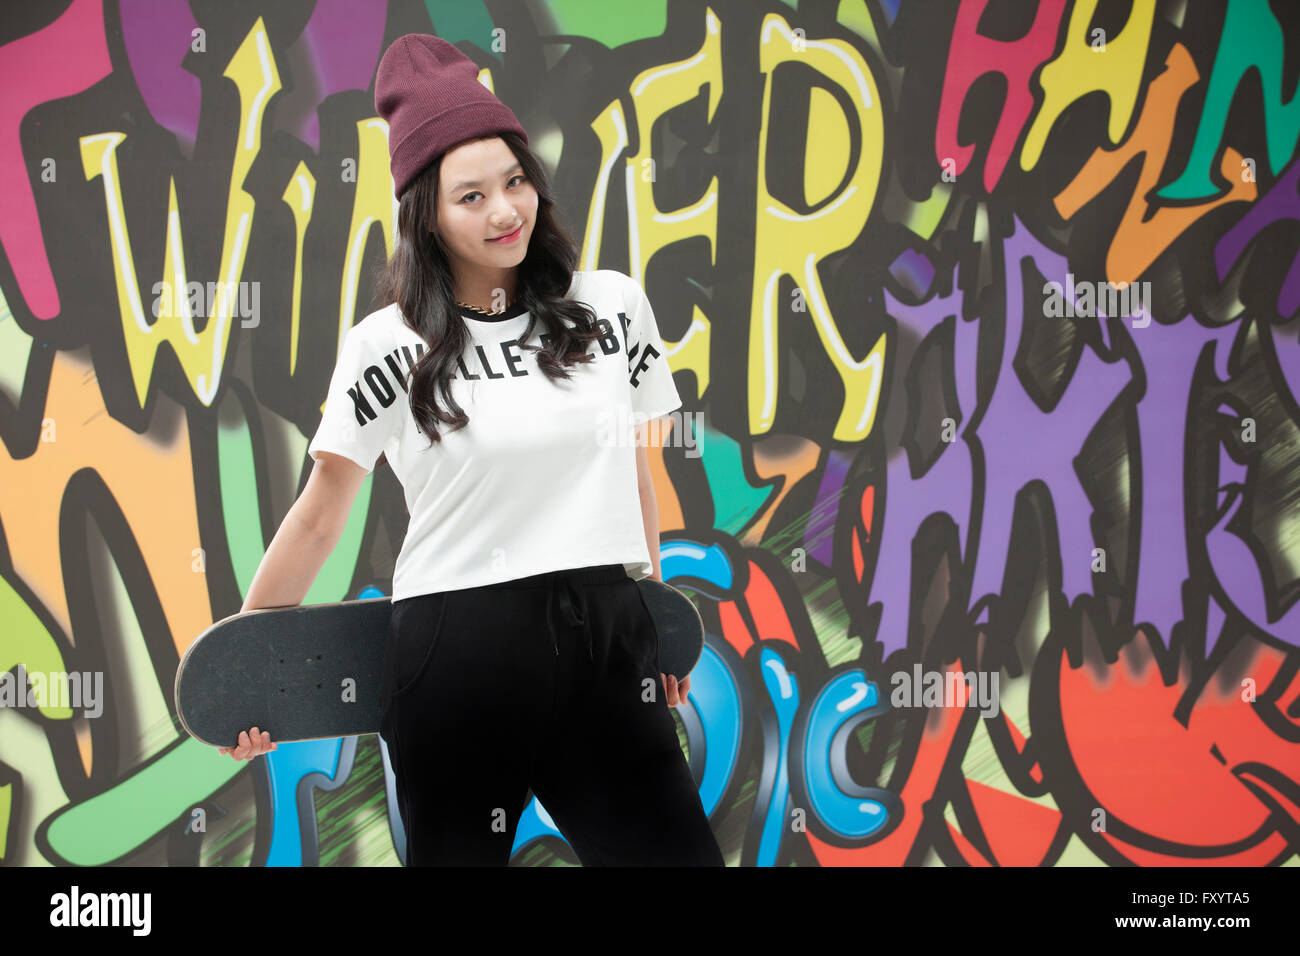 Young smiling woman in style hip-hop holding a skateboard regarder front contre l'art du graffiti Banque D'Images